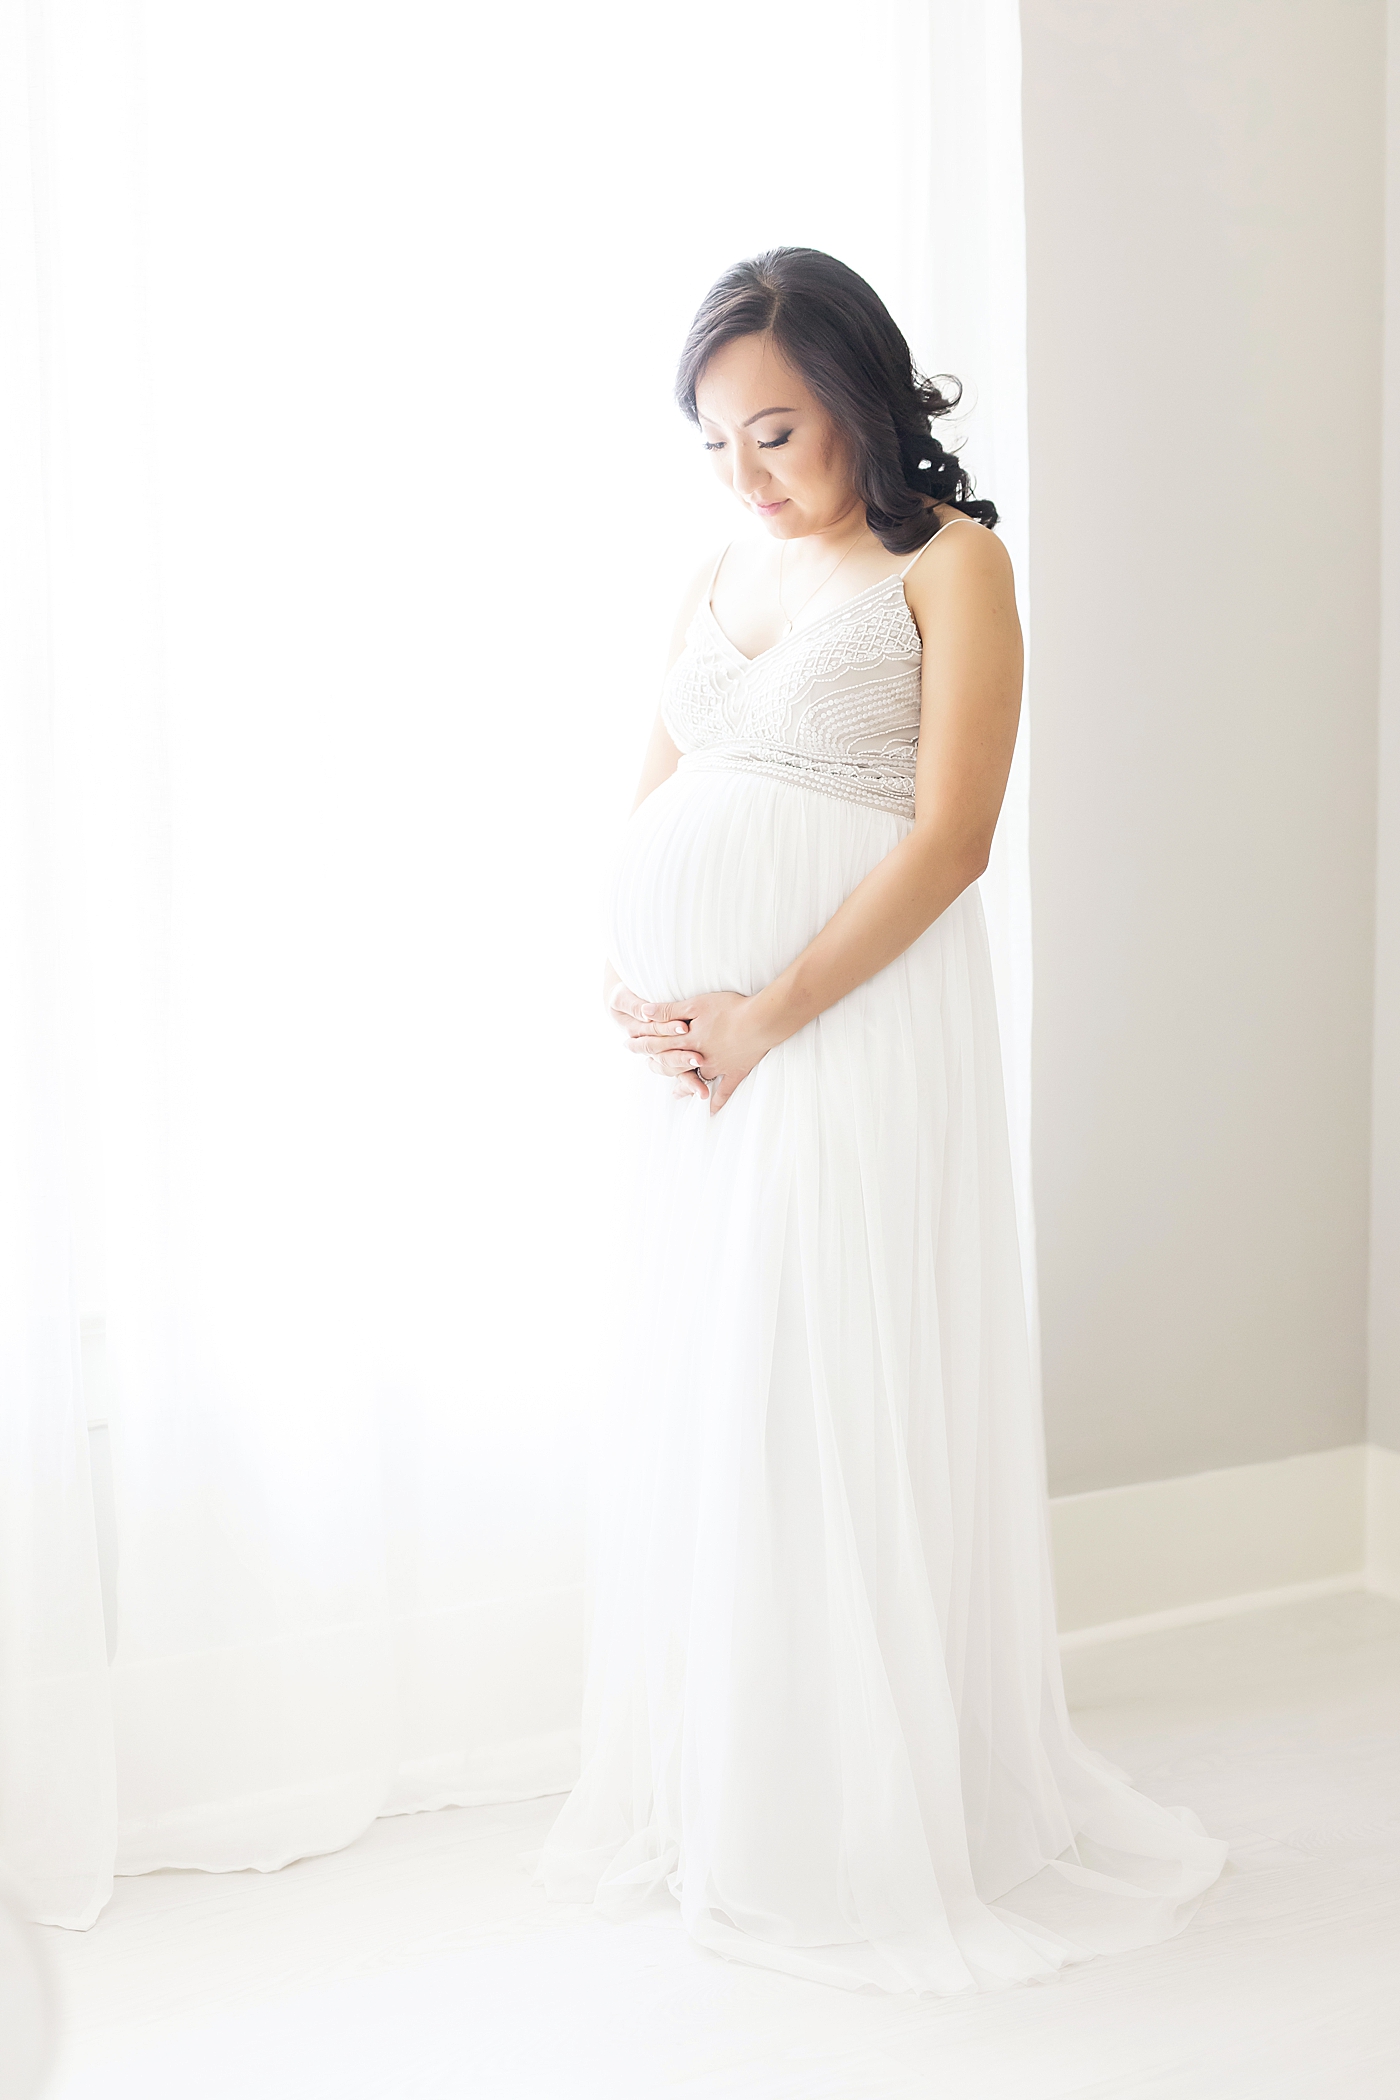 Pregnant mom in beautiful white dress standing in front of a window. Photo by Fresh Light Photography.